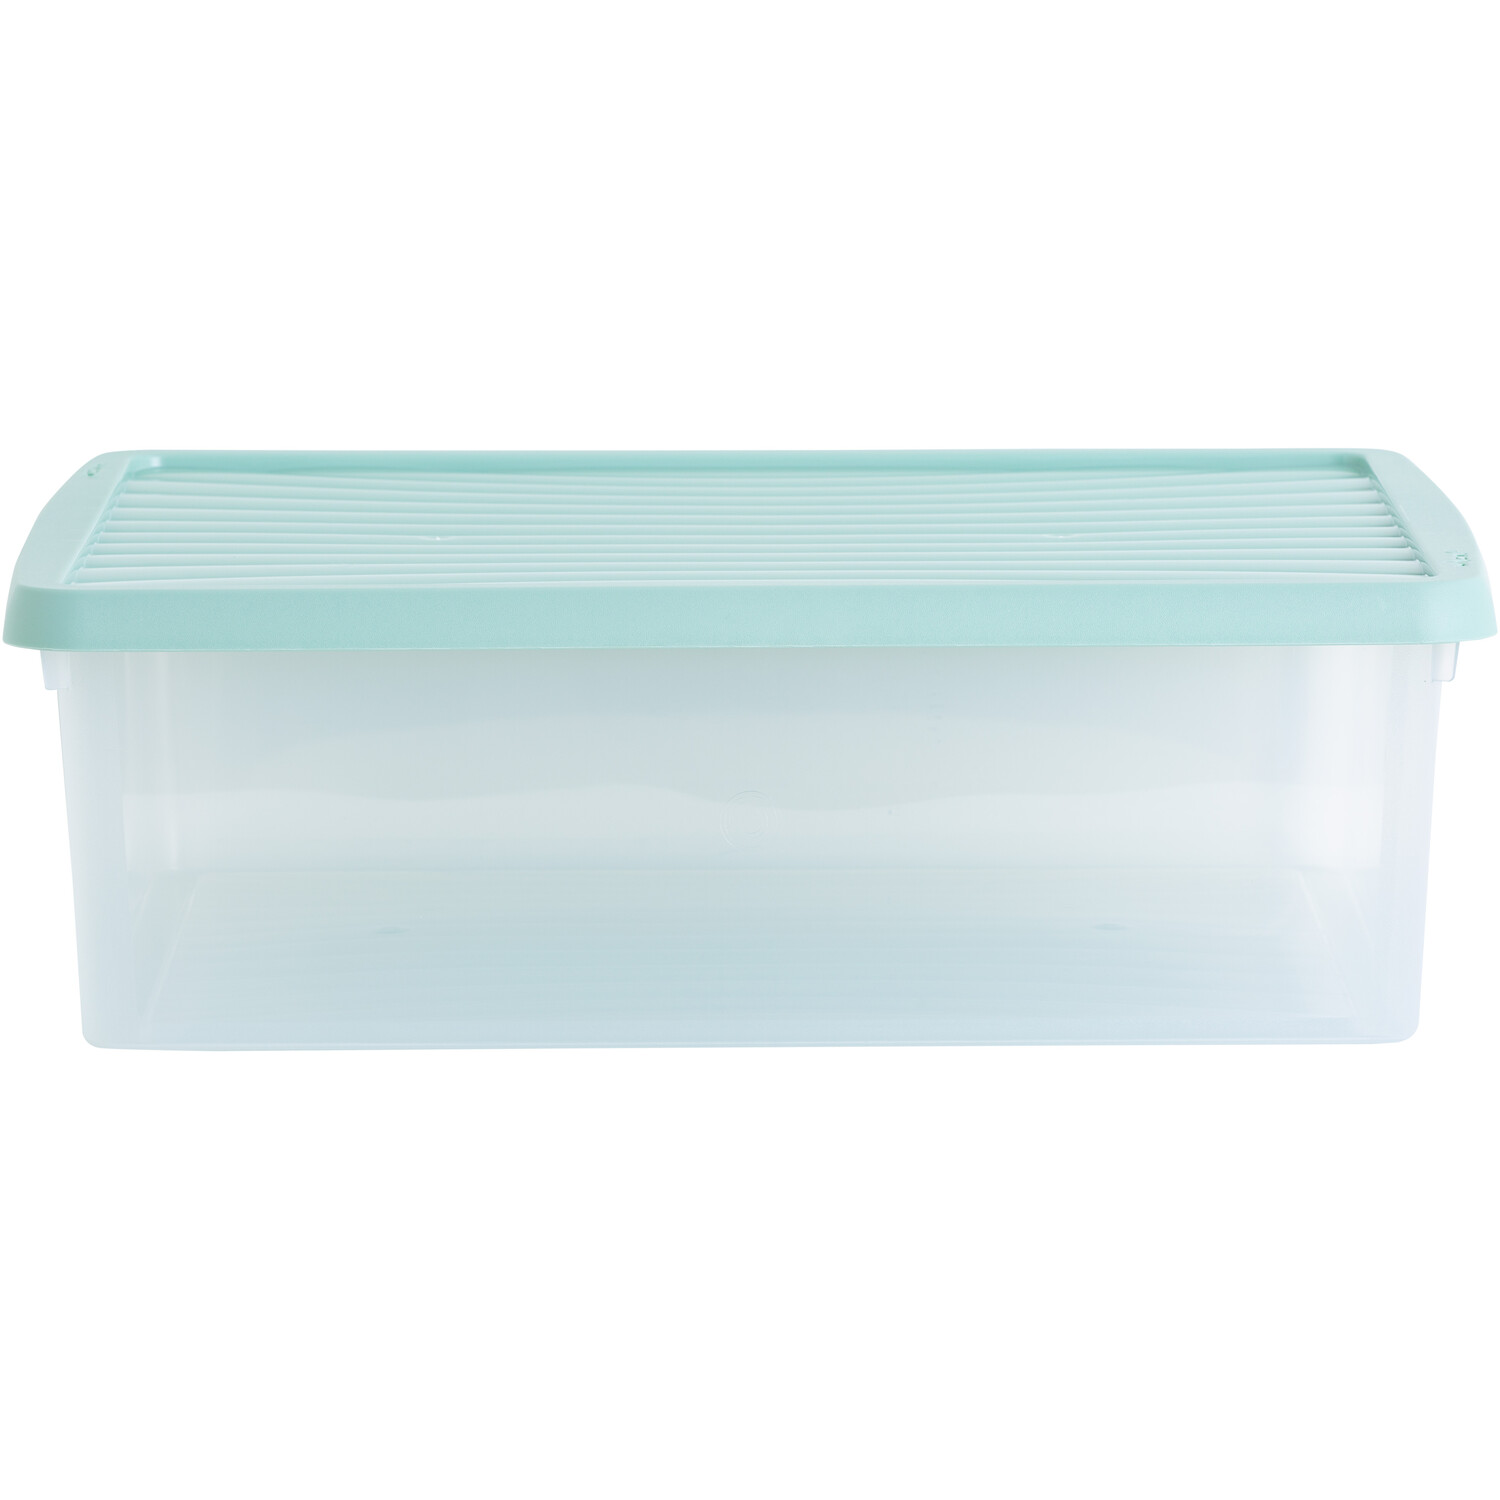 Single 23L Clear Stackable Storage Box with Lid in Assorted styles Image 3